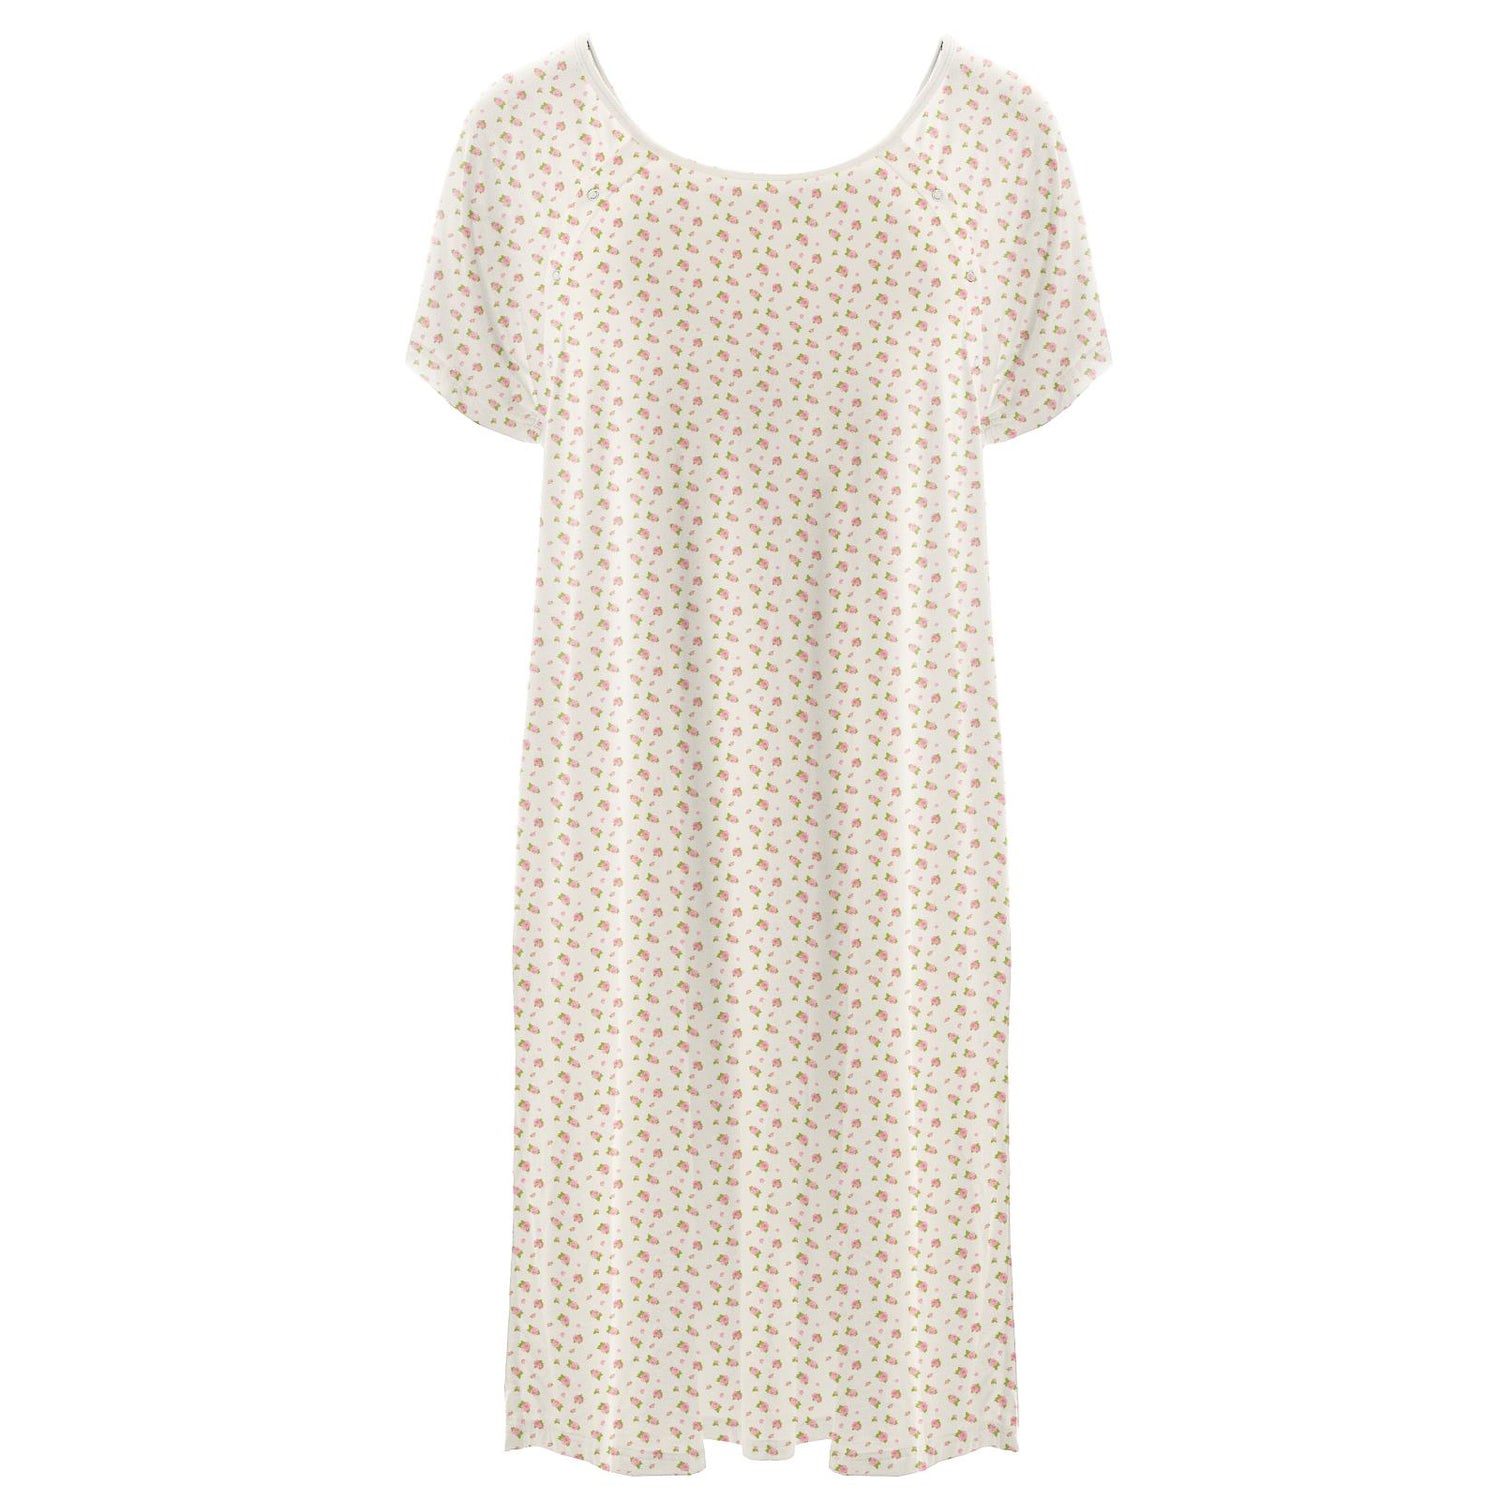 Women's Print Hospital Gown in Natural Buds